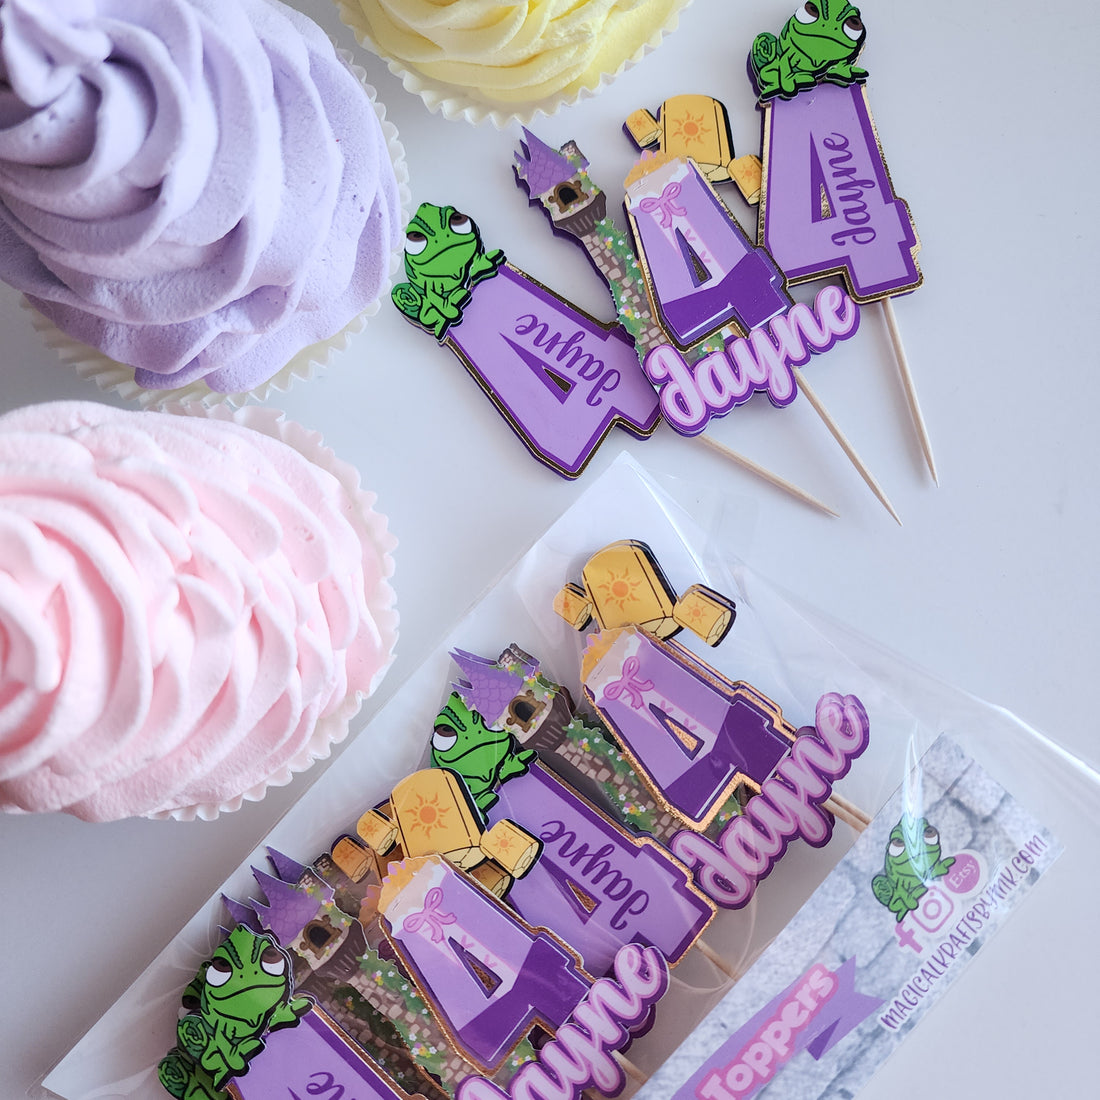 Lost Princess Cupcake Toppers